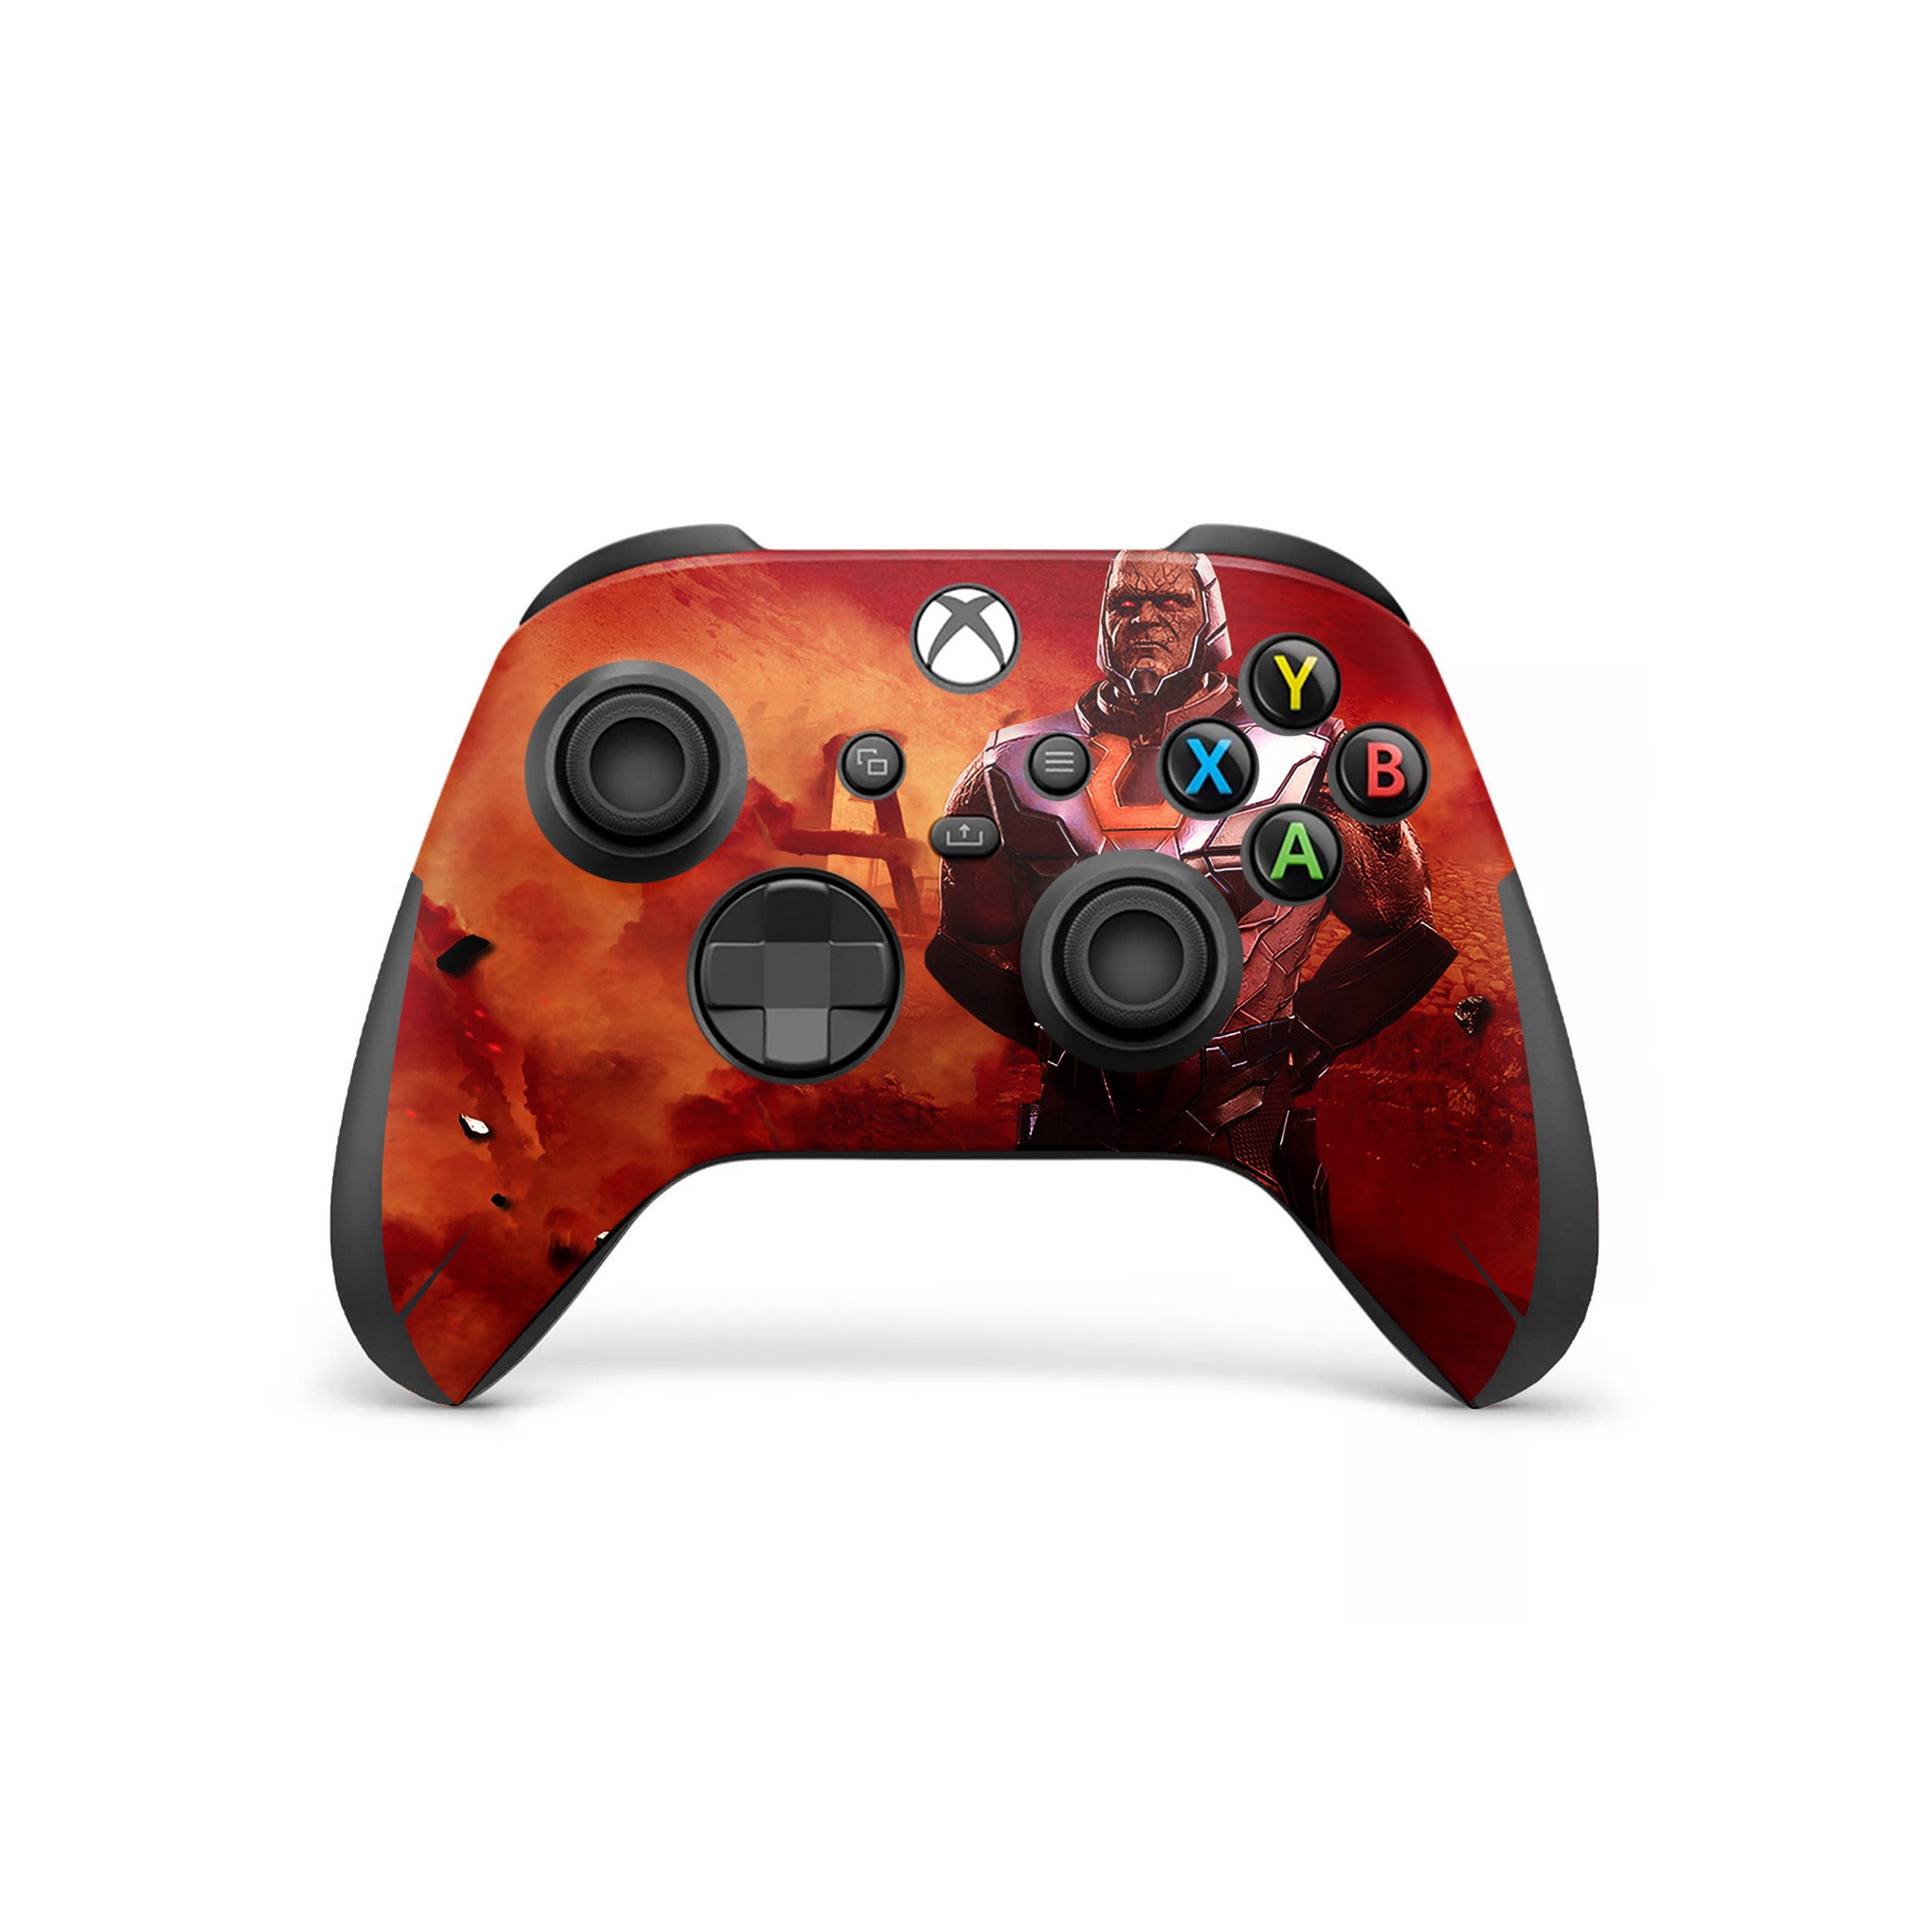 A video game skin featuring a DC Comics Darkseid design for the Xbox Wireless Controller.